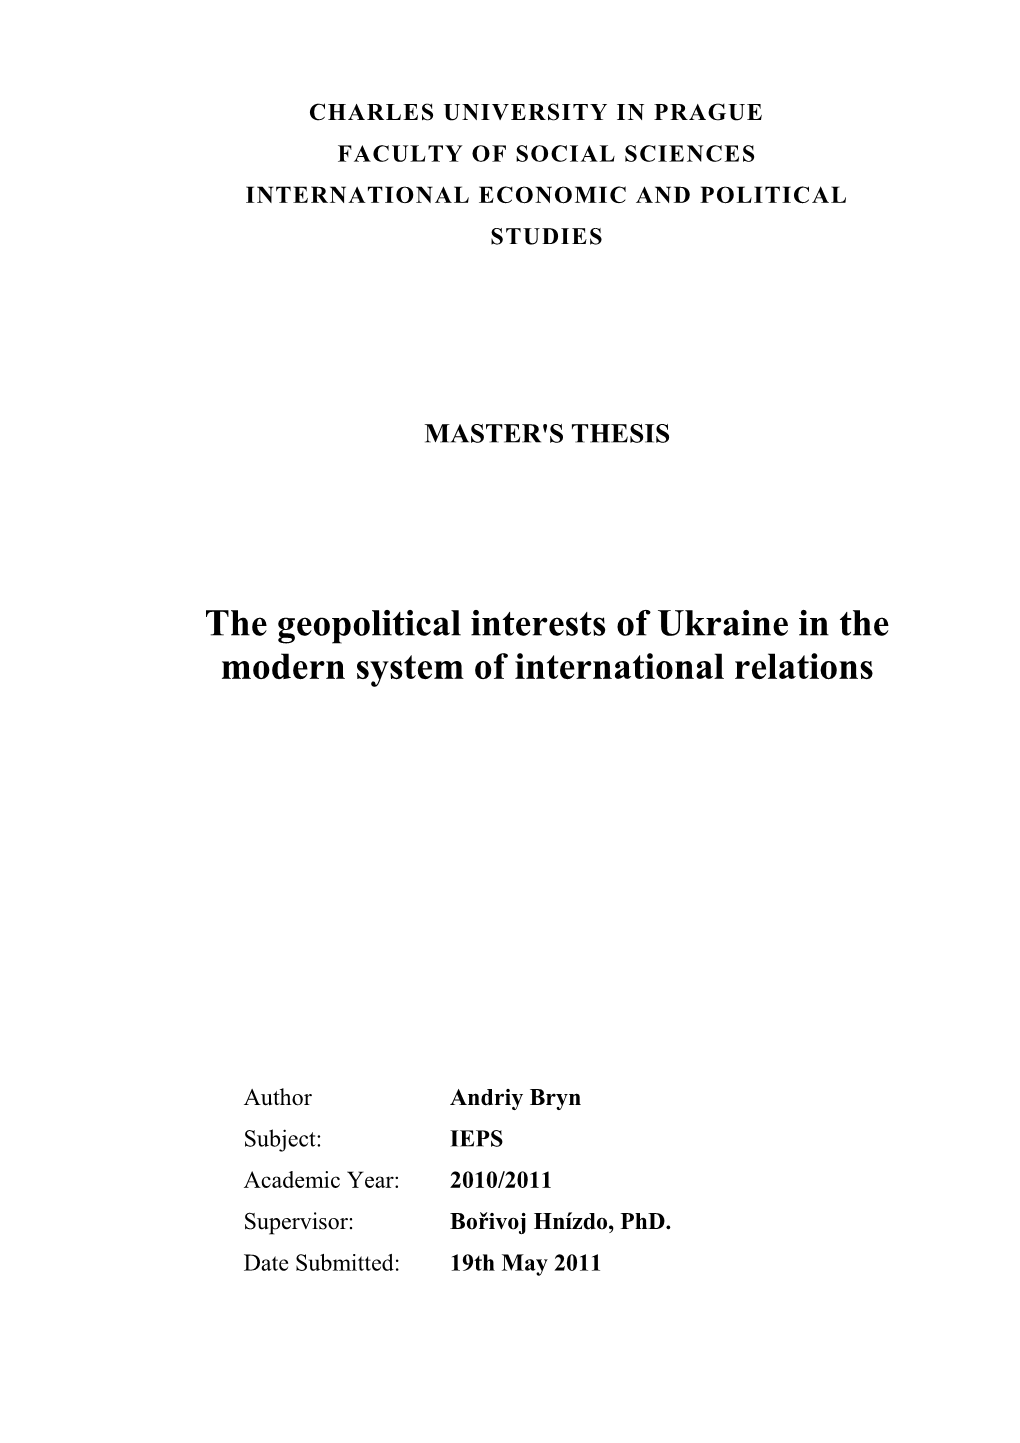 The Geopolitical Interests of Ukraine in the Modern System of International Relations